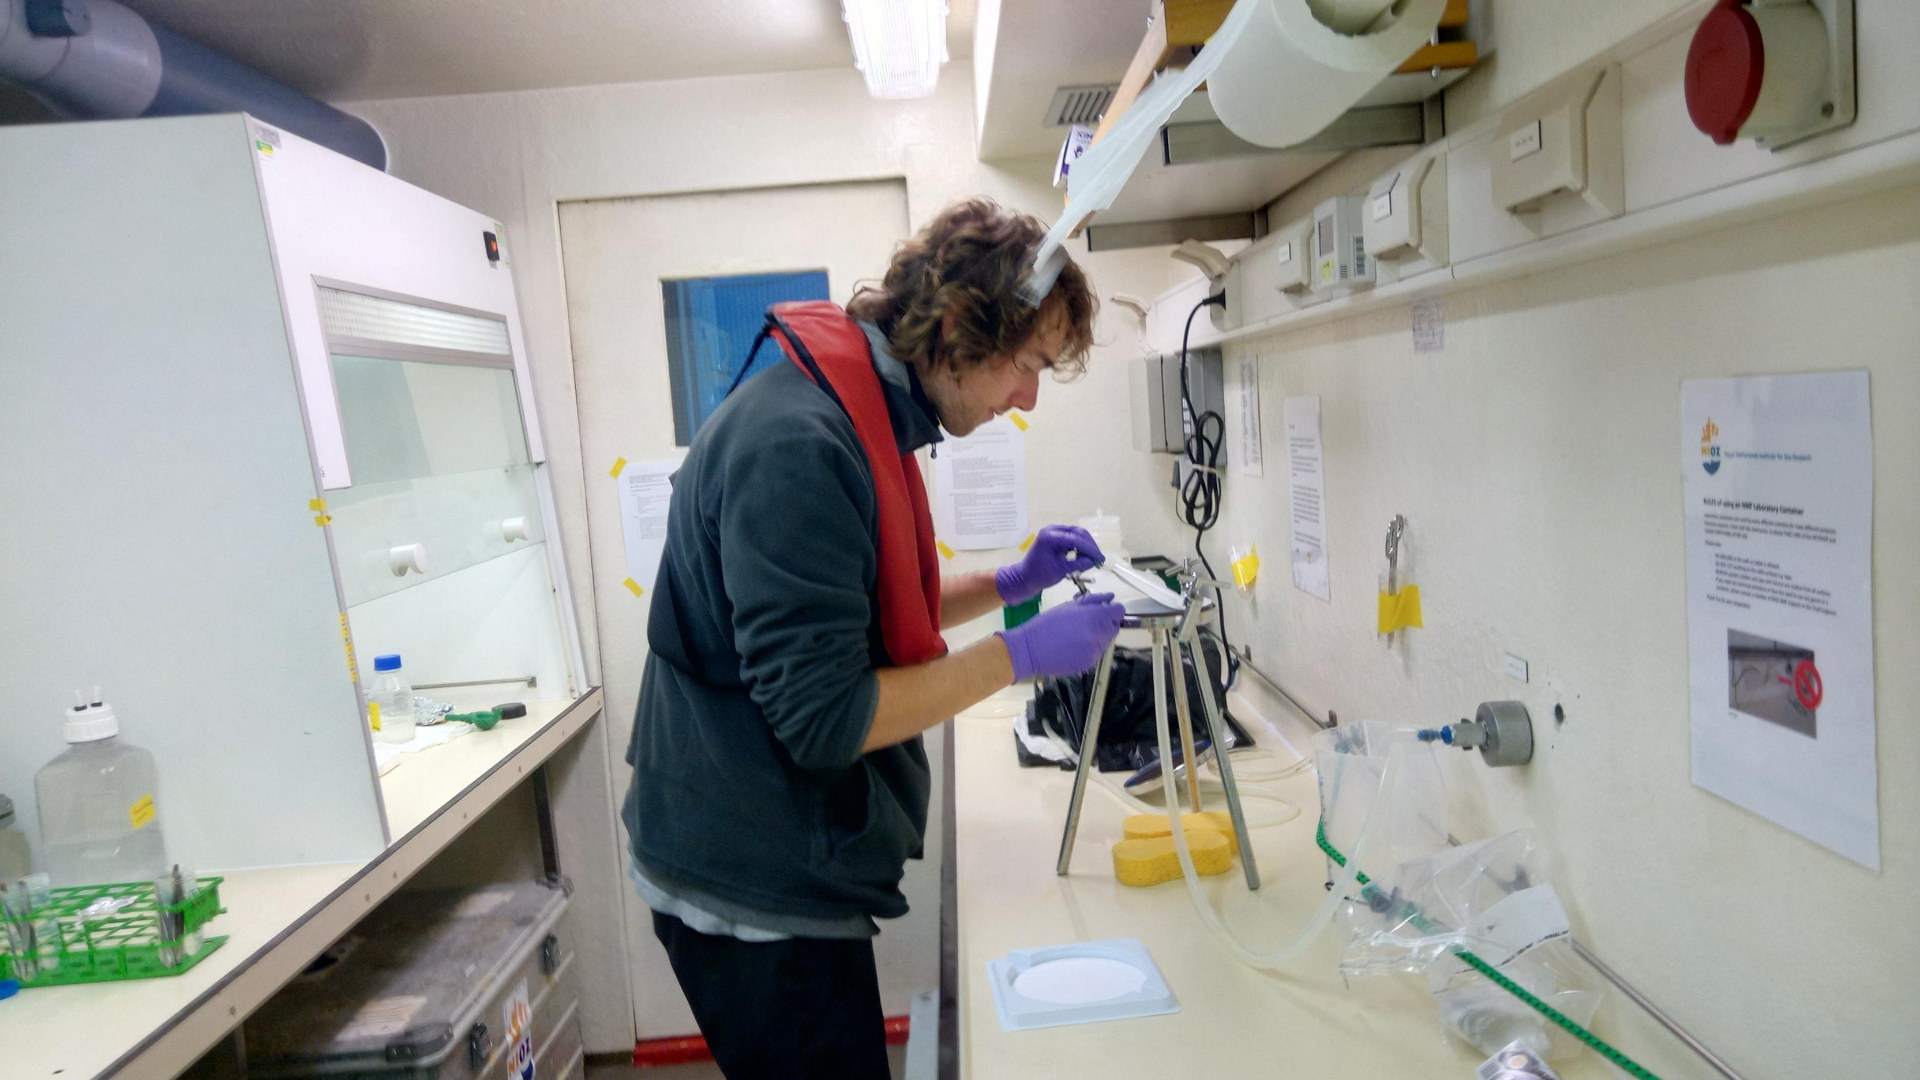 Pierre 'harvesting' one of the last filters with microbial communities from the water. Photo: NIOZ, Julia Engelmann